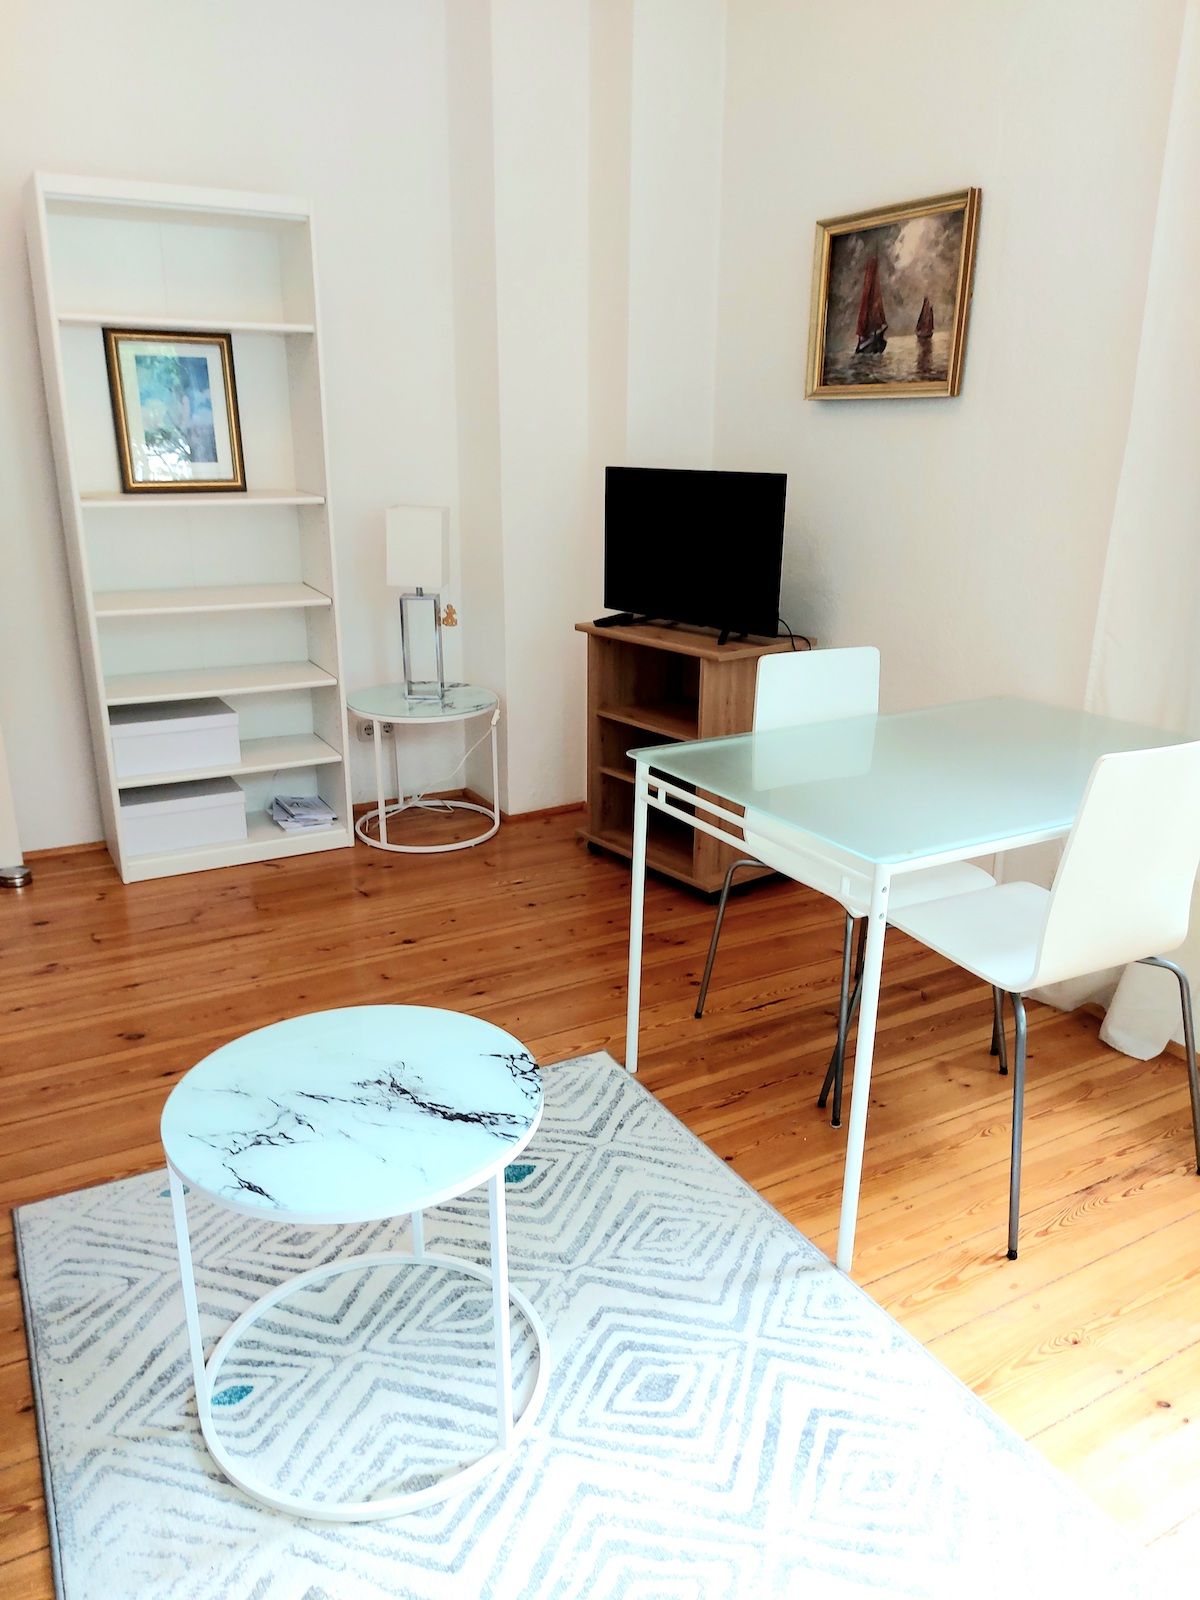 Very sunny and cosy apartment with balcony to green area, near FU and S1 Sundgauer Str.Station